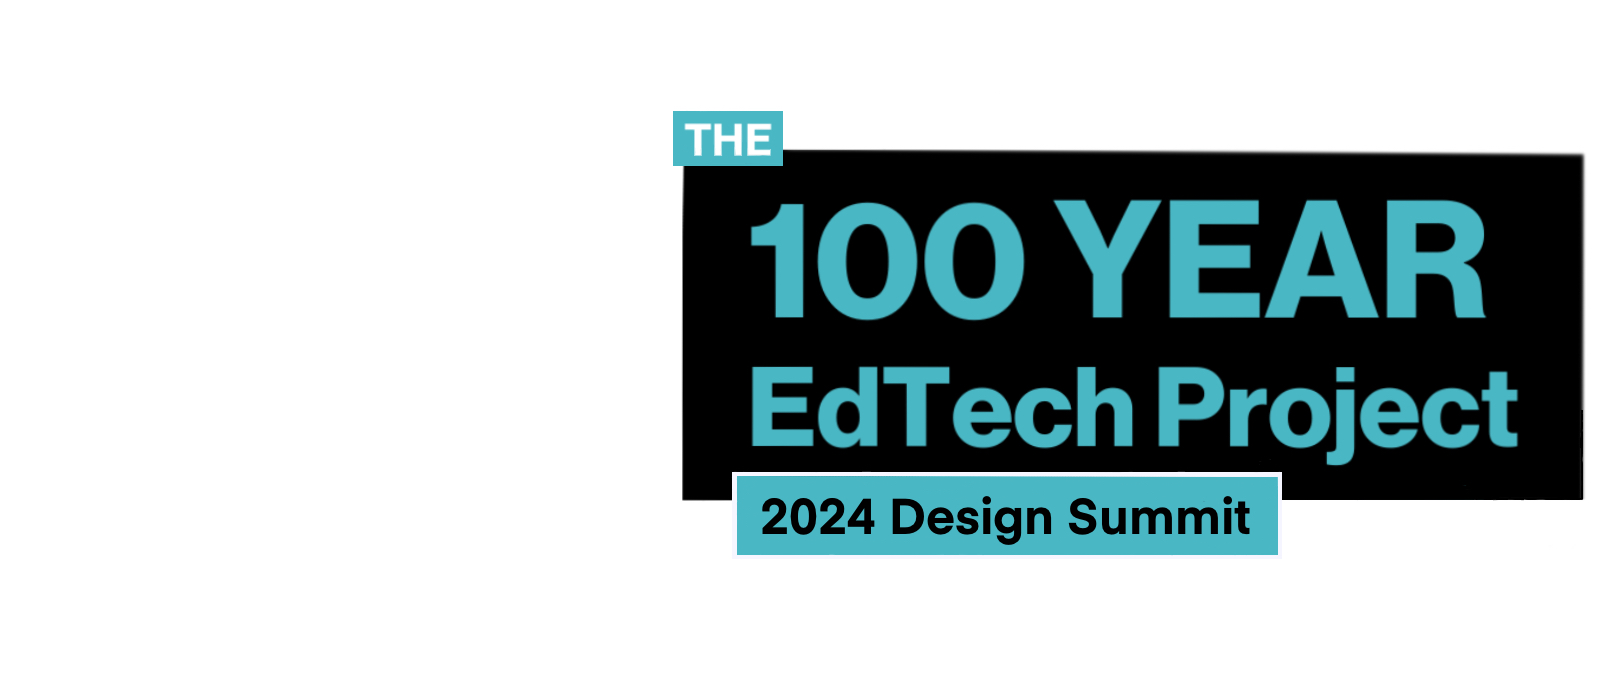 Harrisburg University Joins Conversation on Access, Fairness, and Justice at 100-Year EdTech Project Design Summit